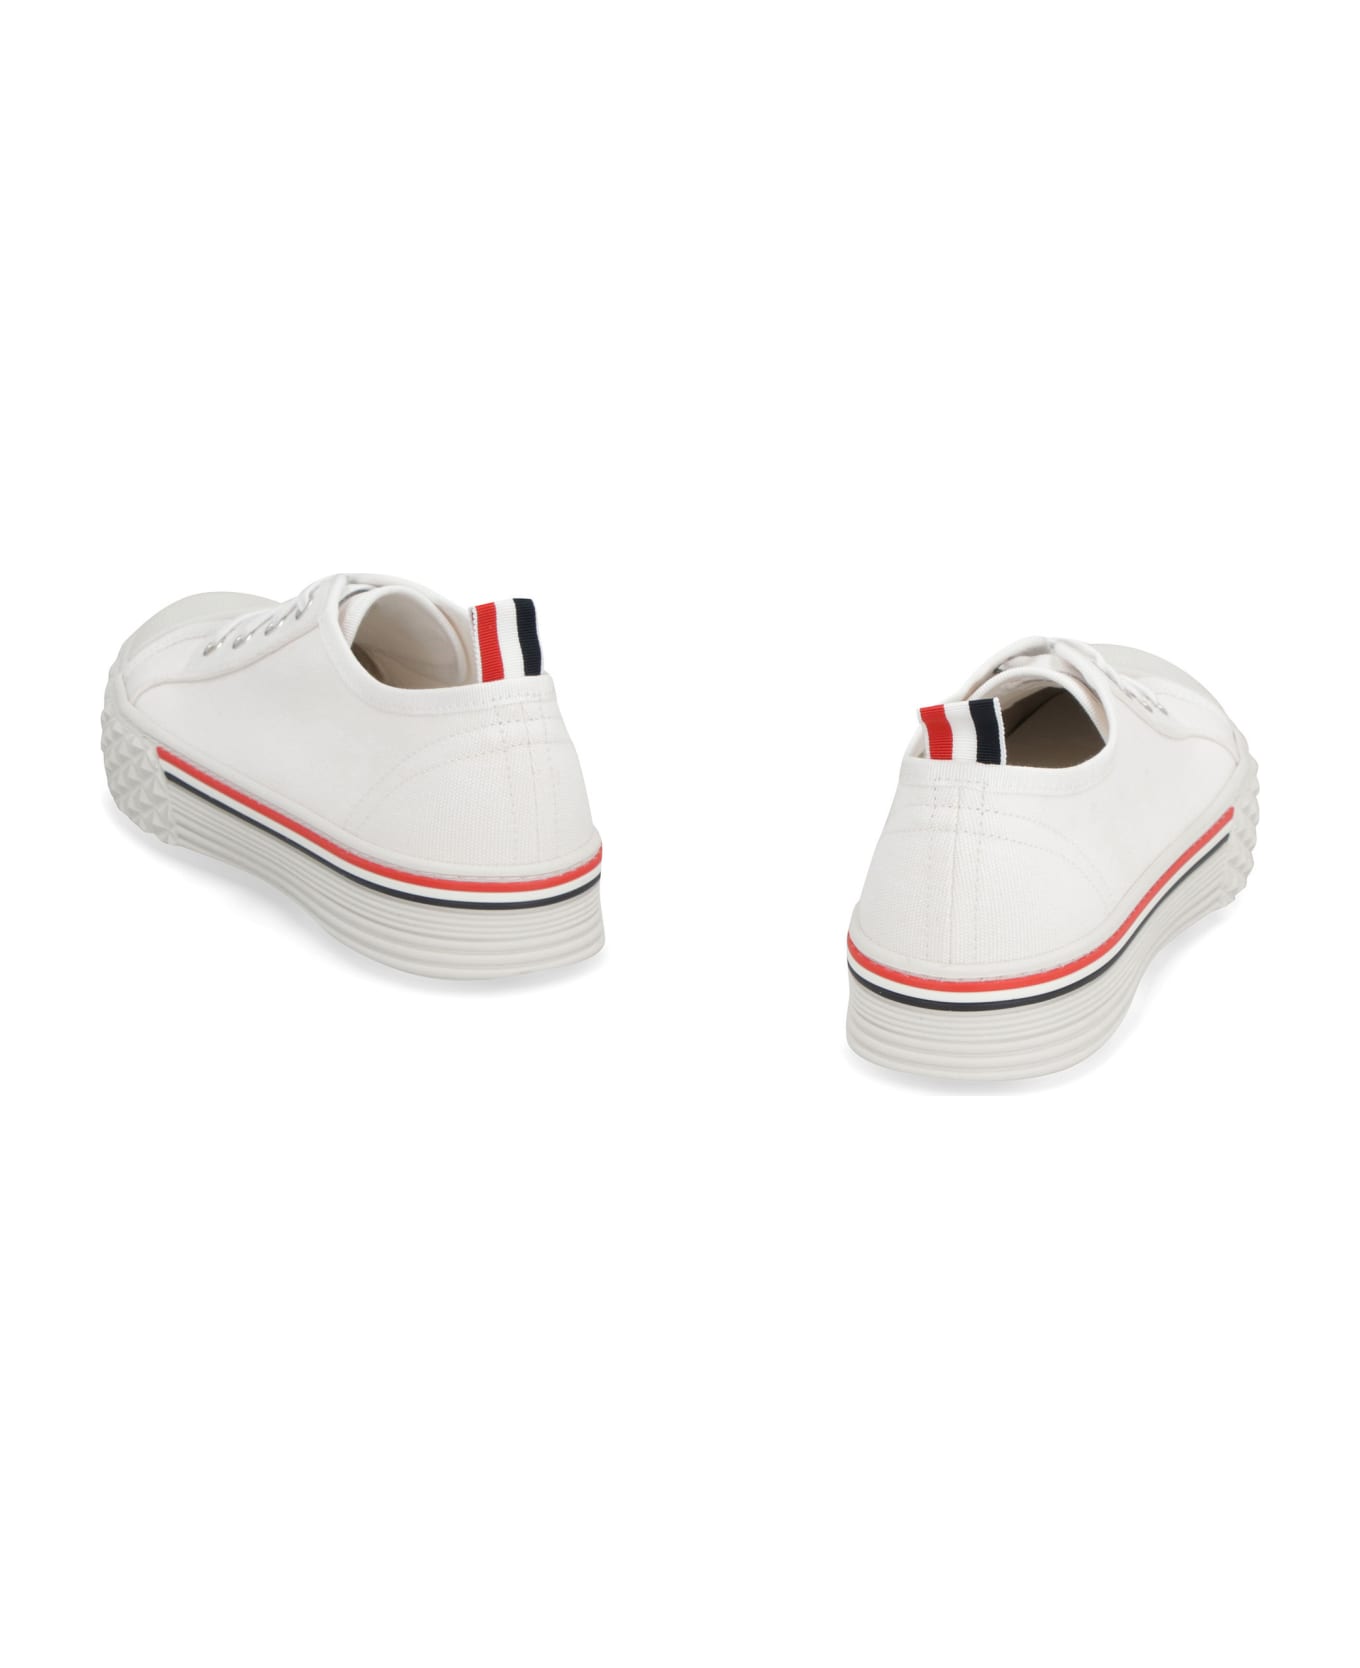 Thom Browne Collegiate Canvas Low-top Sneakers - White スニーカー